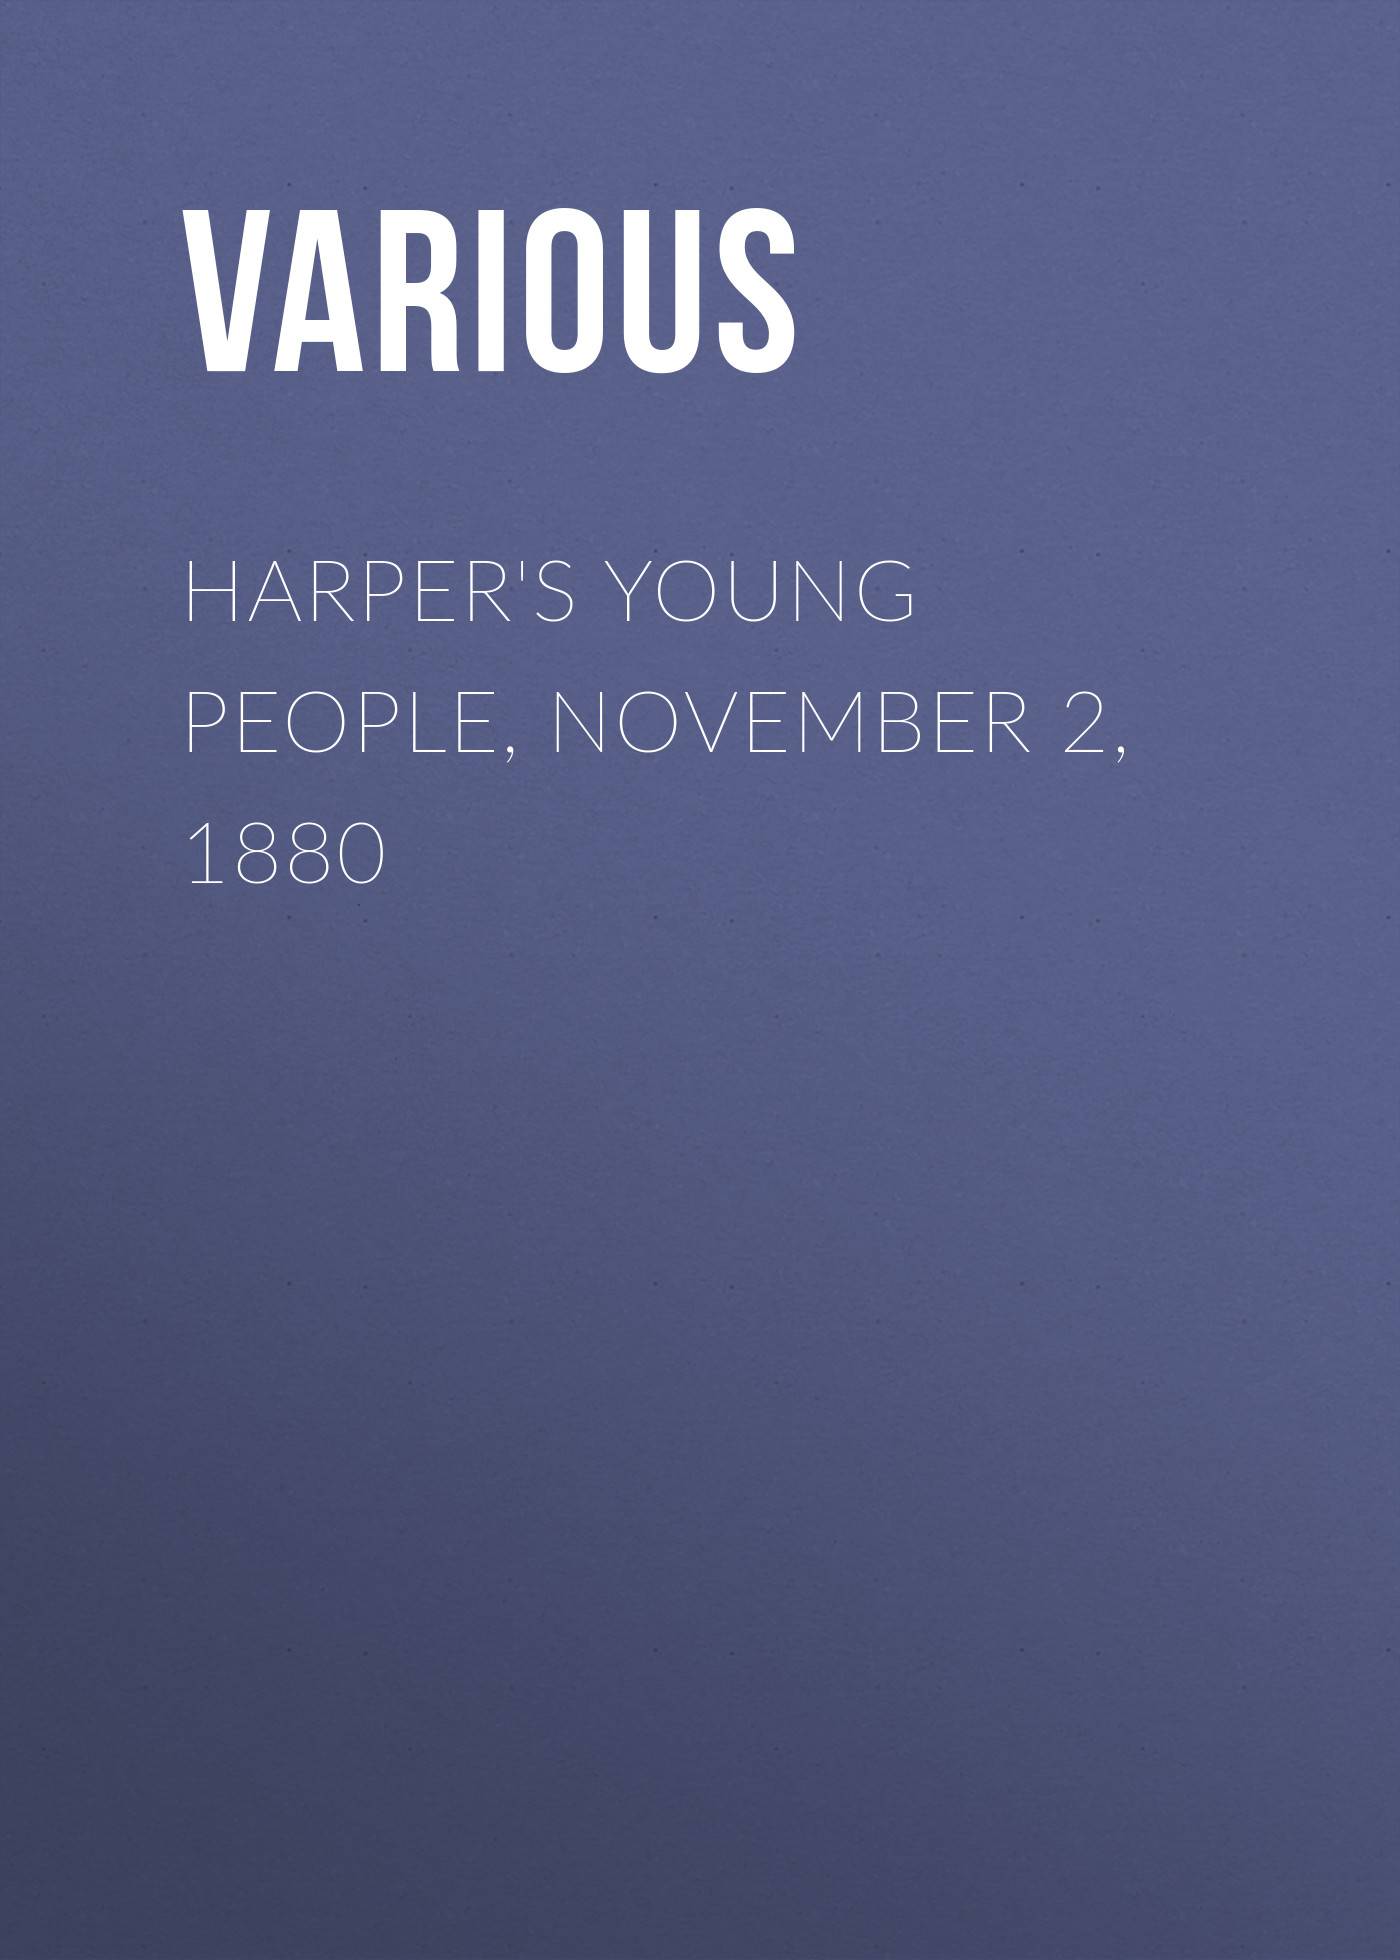 Various Harper's Young People, November 2, 1880